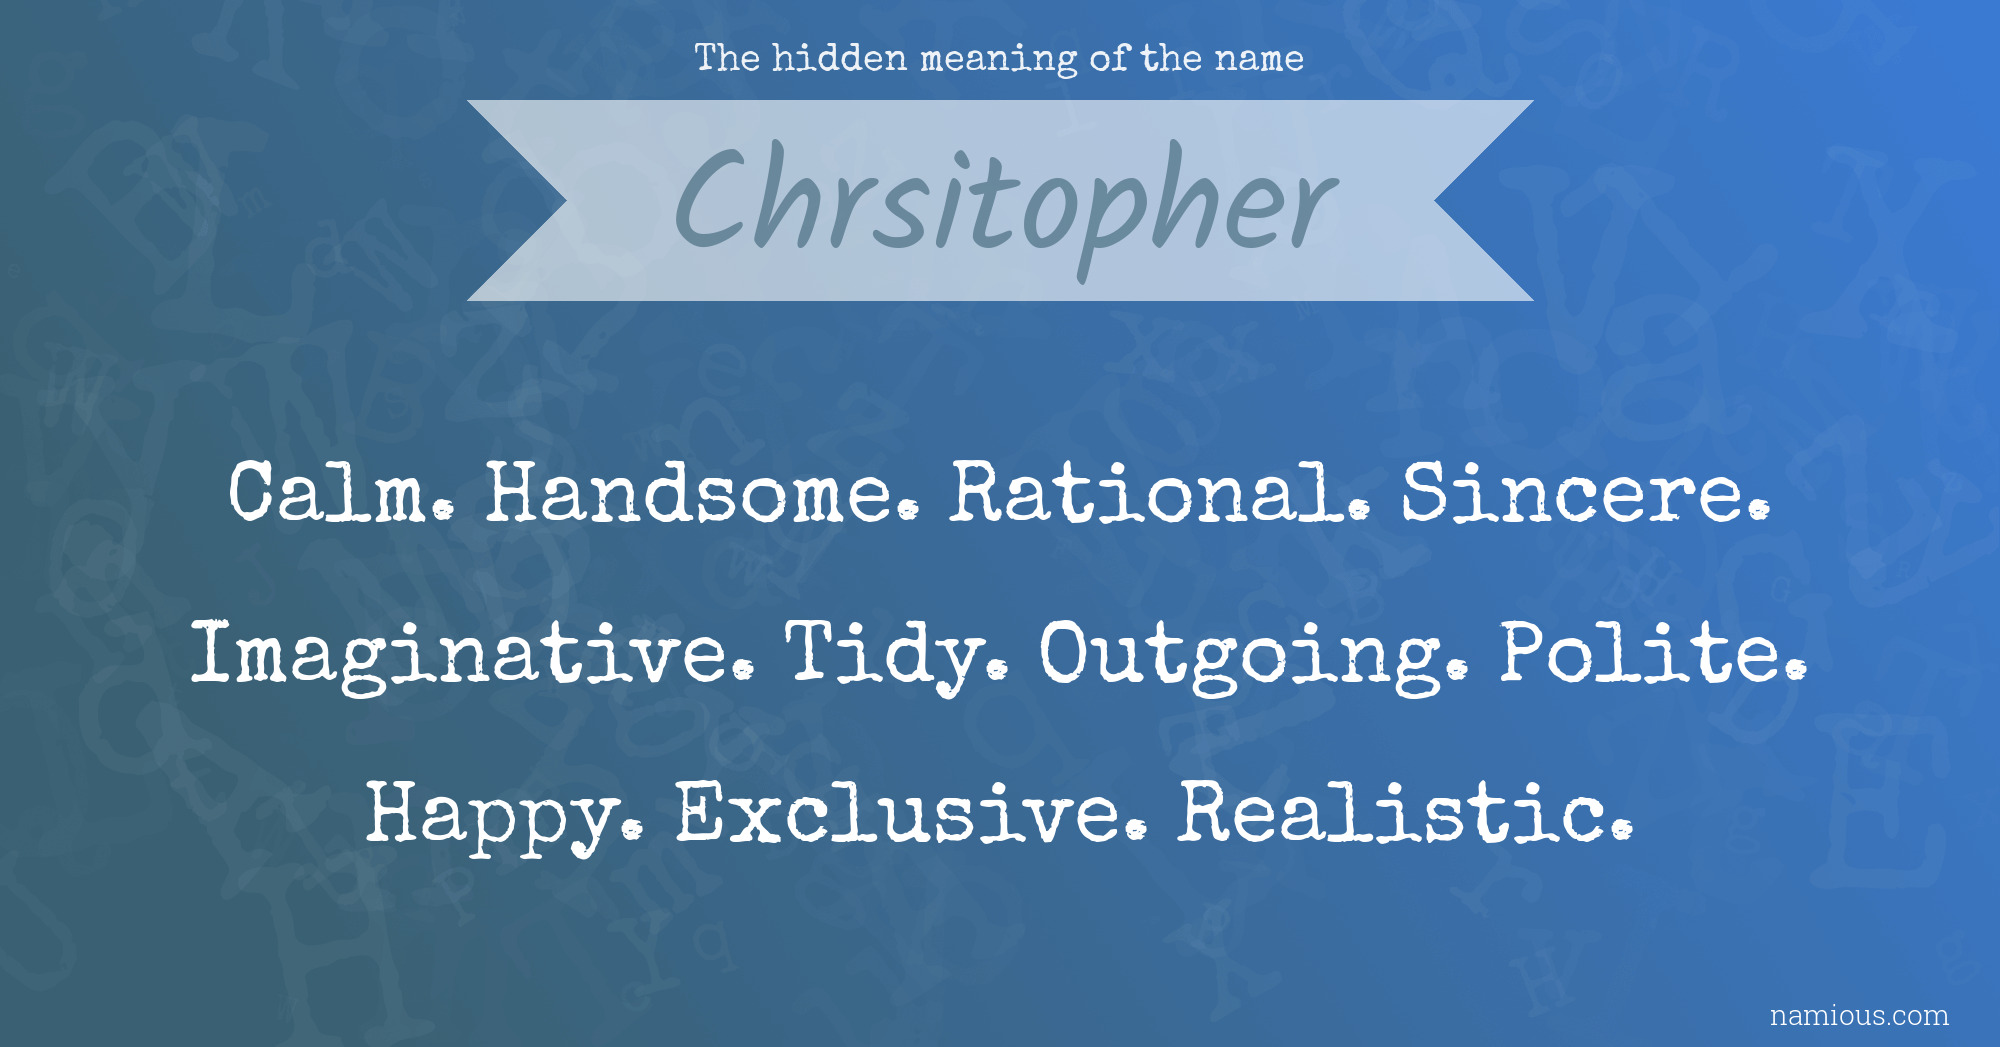 The hidden meaning of the name Chrsitopher